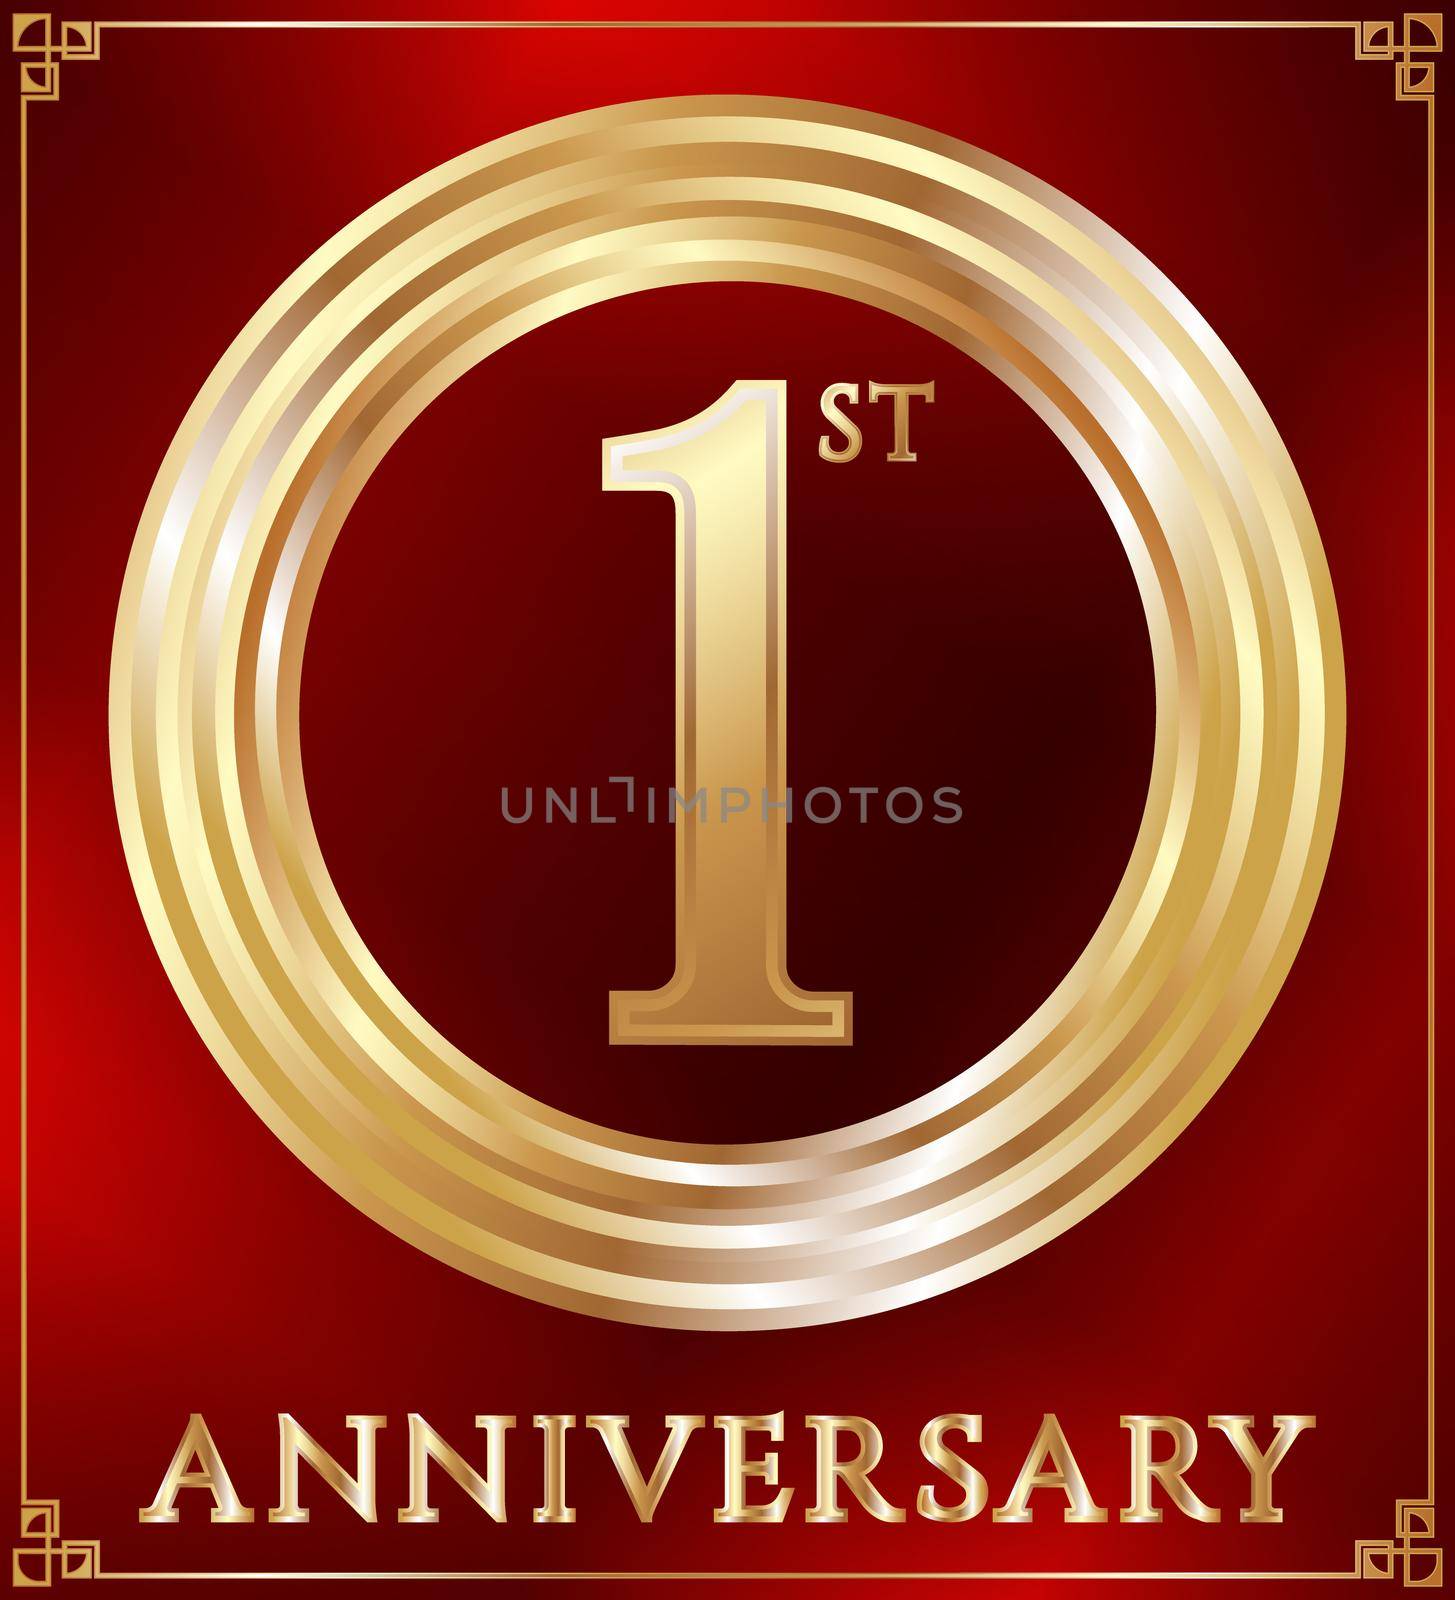 Anniversary gold ring logo number 1. Anniversary card. Red background. Vector illustration.